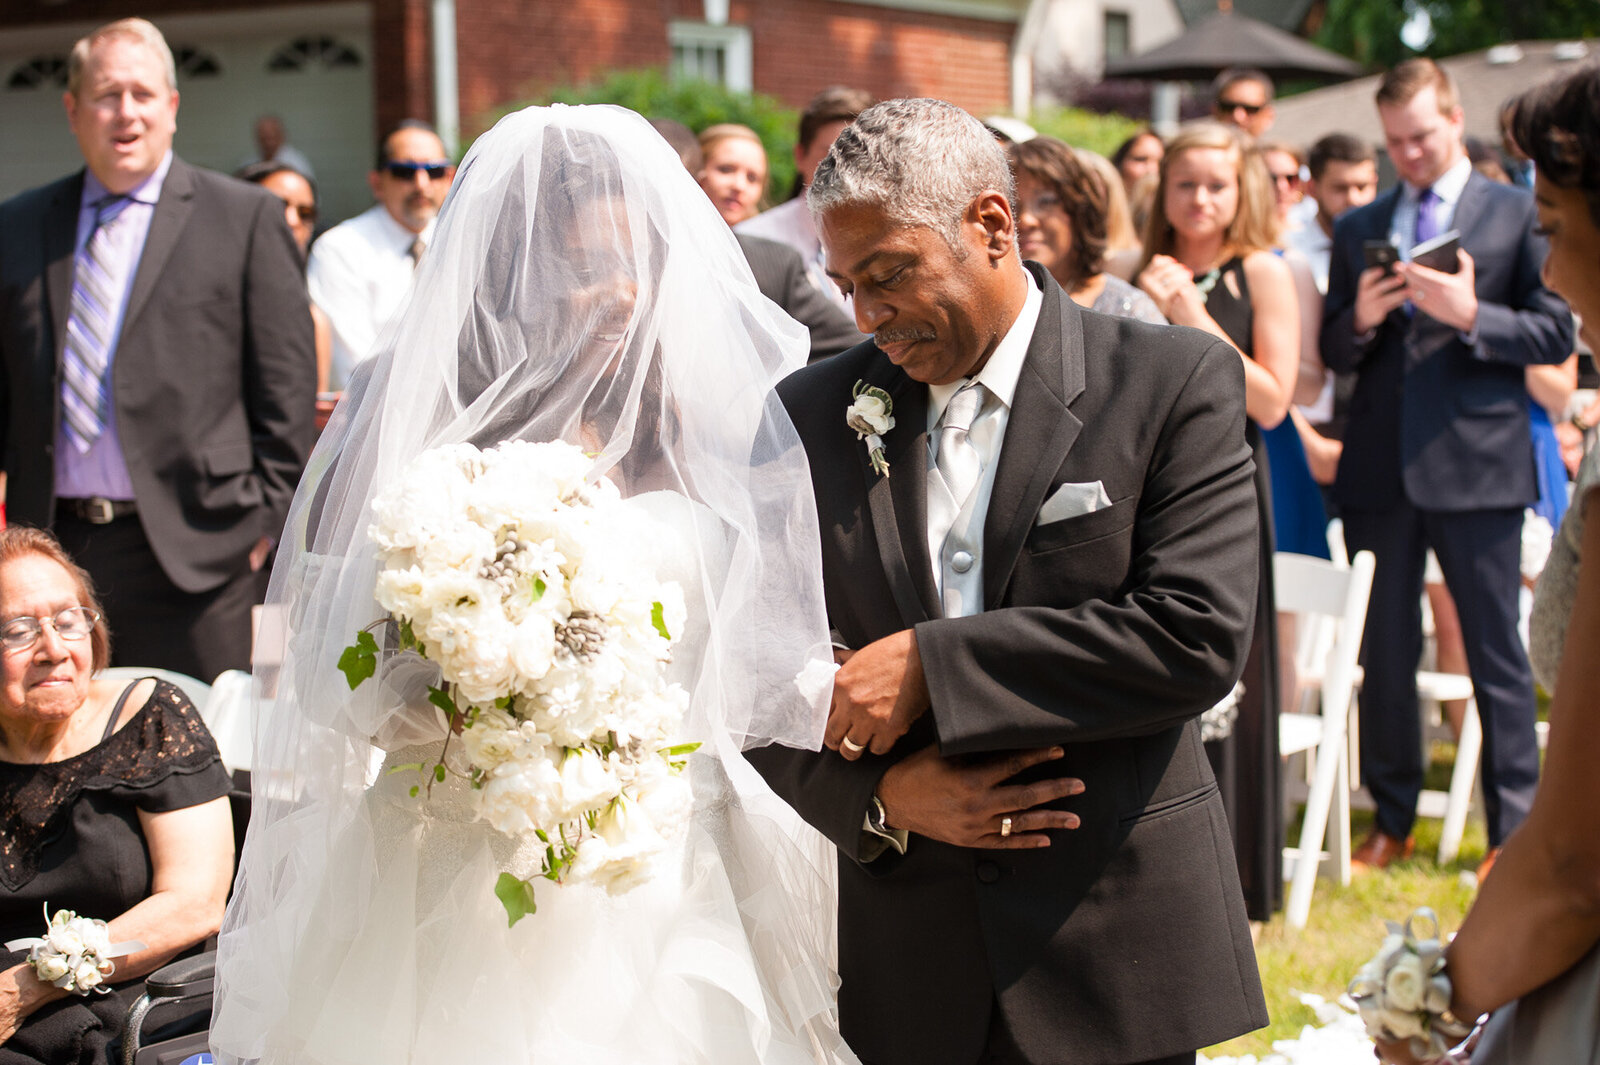 Bride with her father walking on the aisle with guests behind